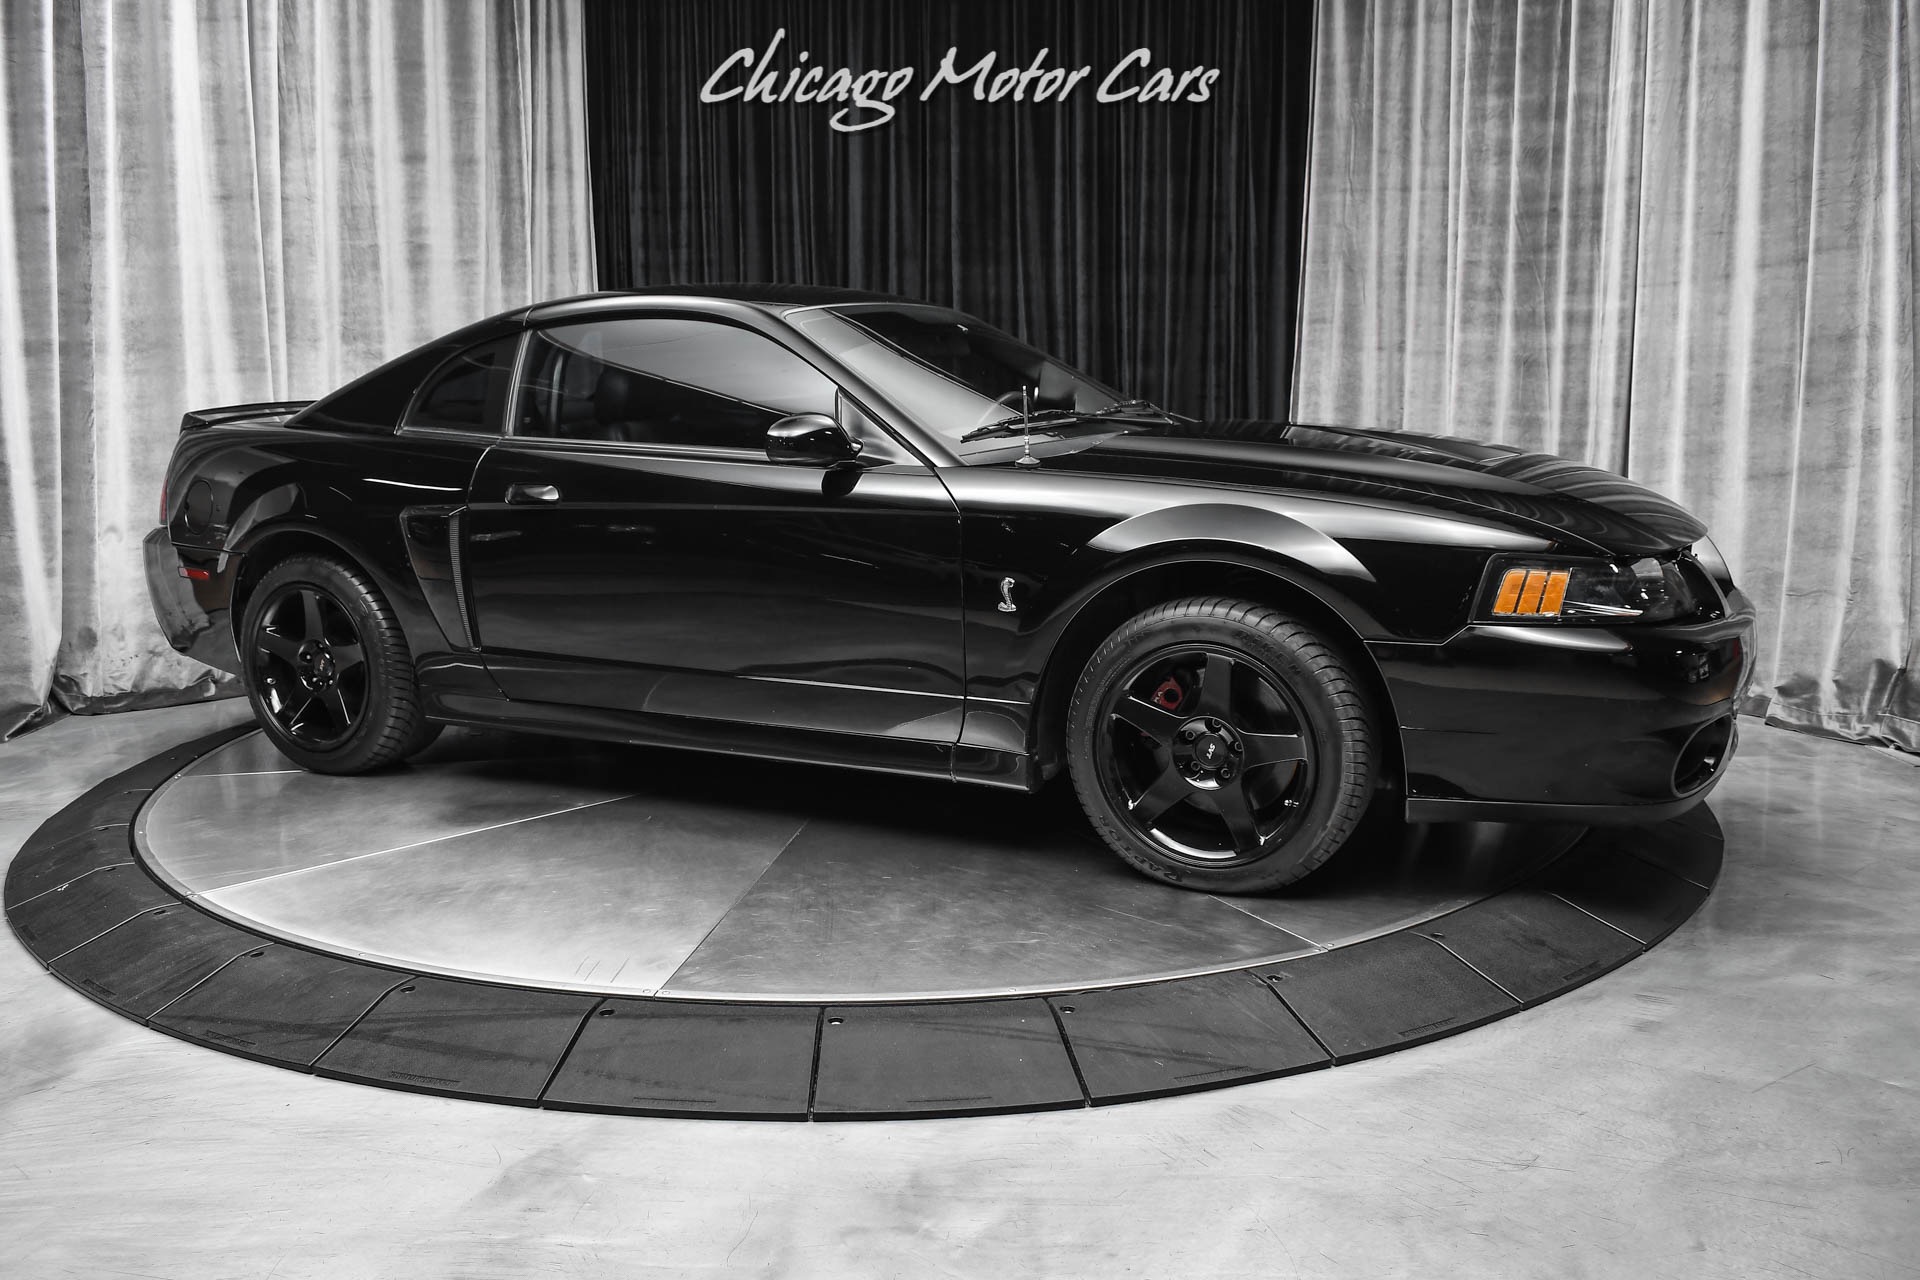 Used-2004-Ford-Mustang-SVT-Cobra-Coupe-UPGRADES-586RWHP-Well-Documented